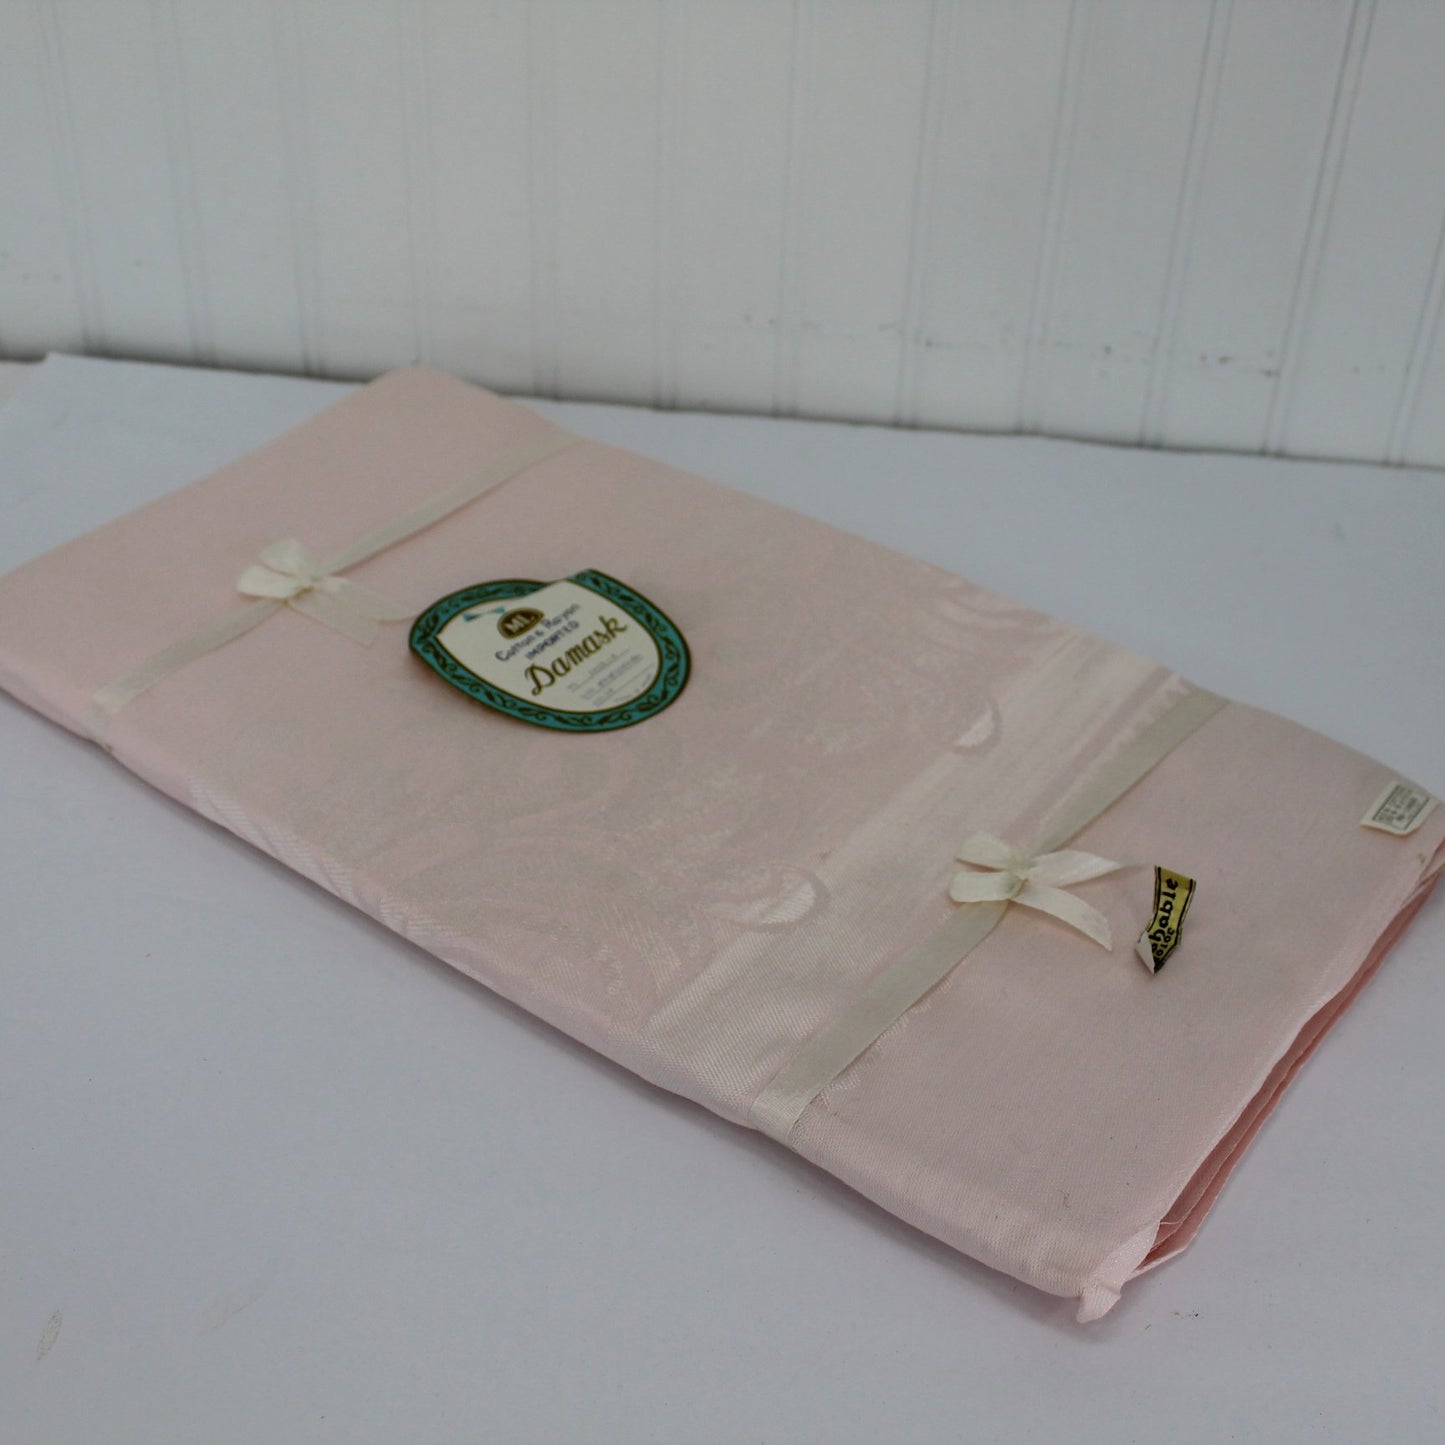 Pink Damask Tablecloth New Vintage Original Labels 6 Matching Napkins Japan table cloth with all labels showing